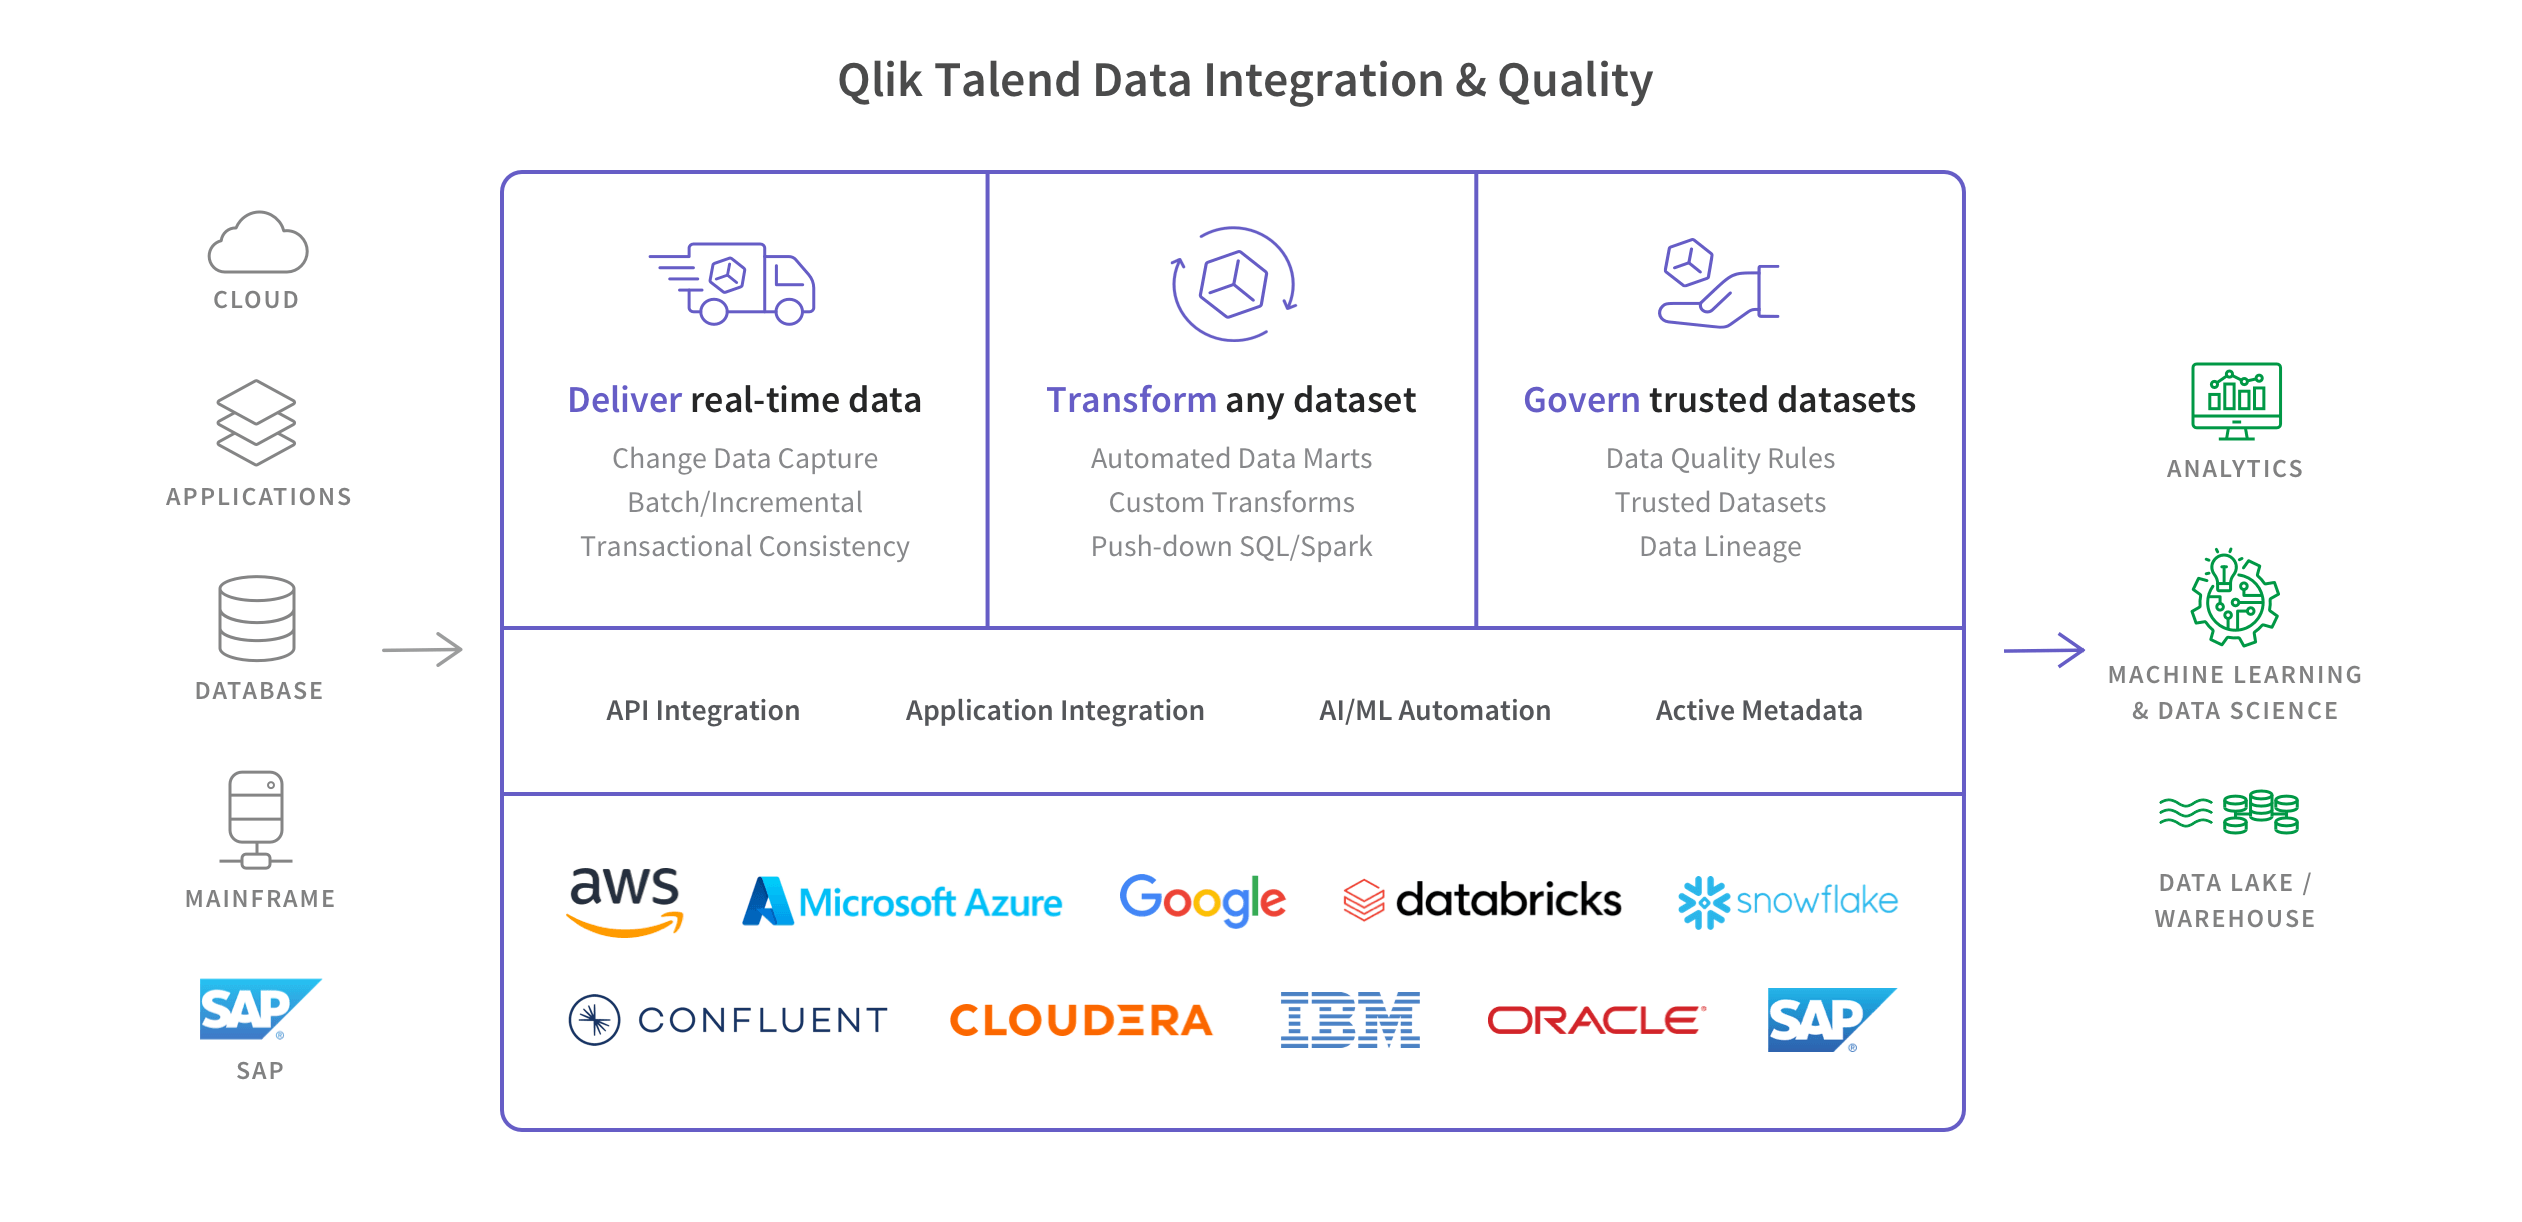 Diagram showing how Qlik Talend Data Integration & quality provides and governs datasets in real time.